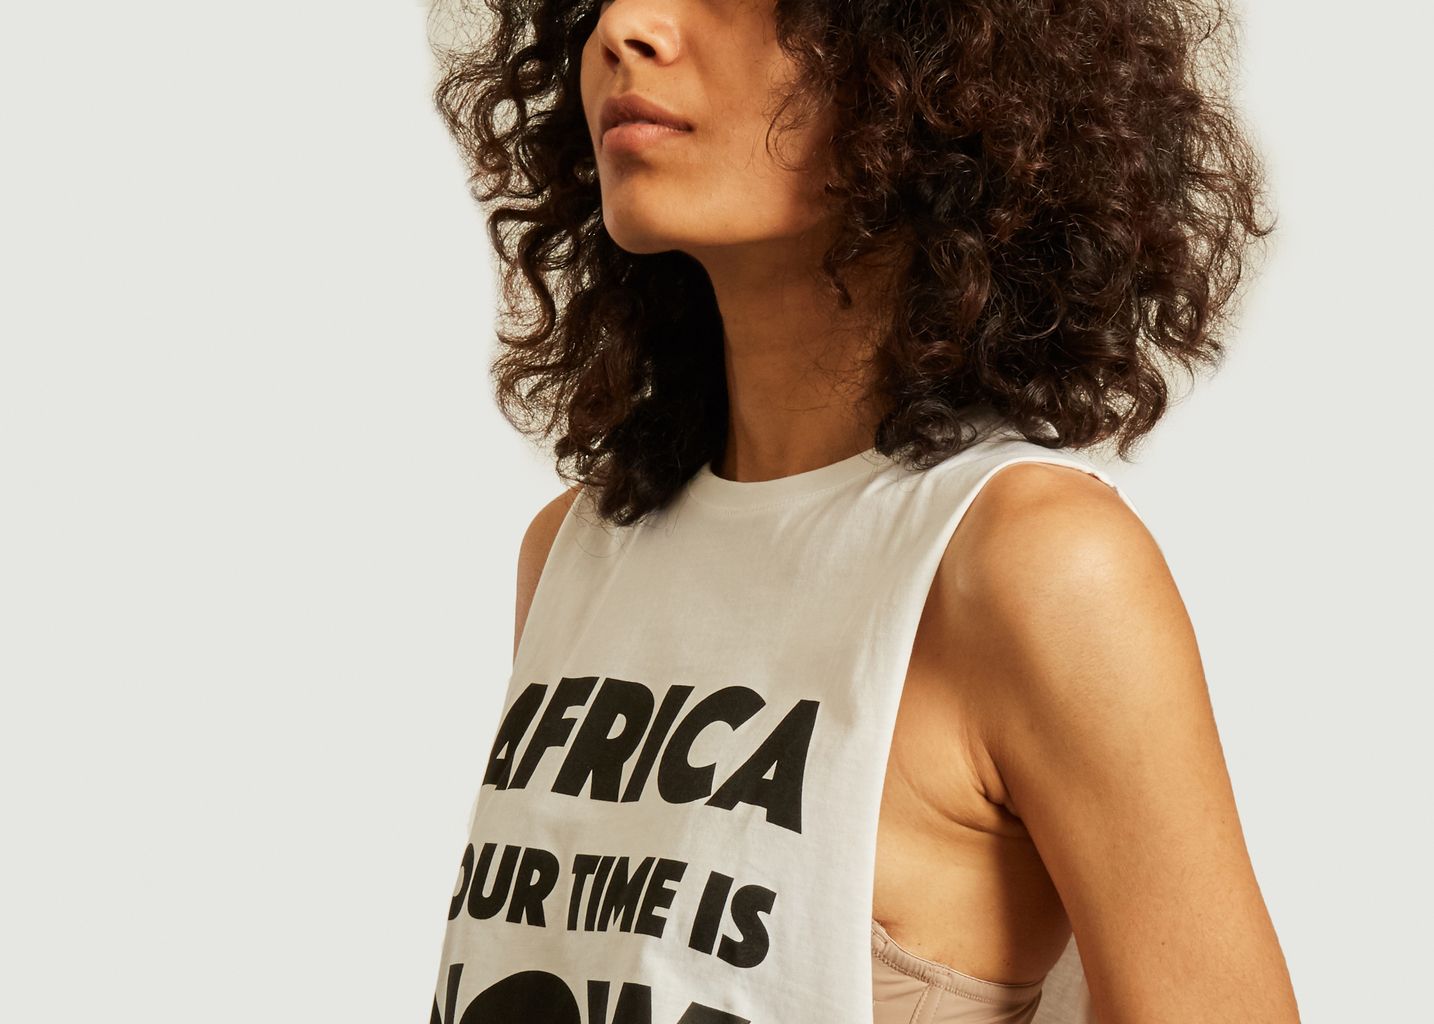 AYTIN printed tank top - Africa your time is now